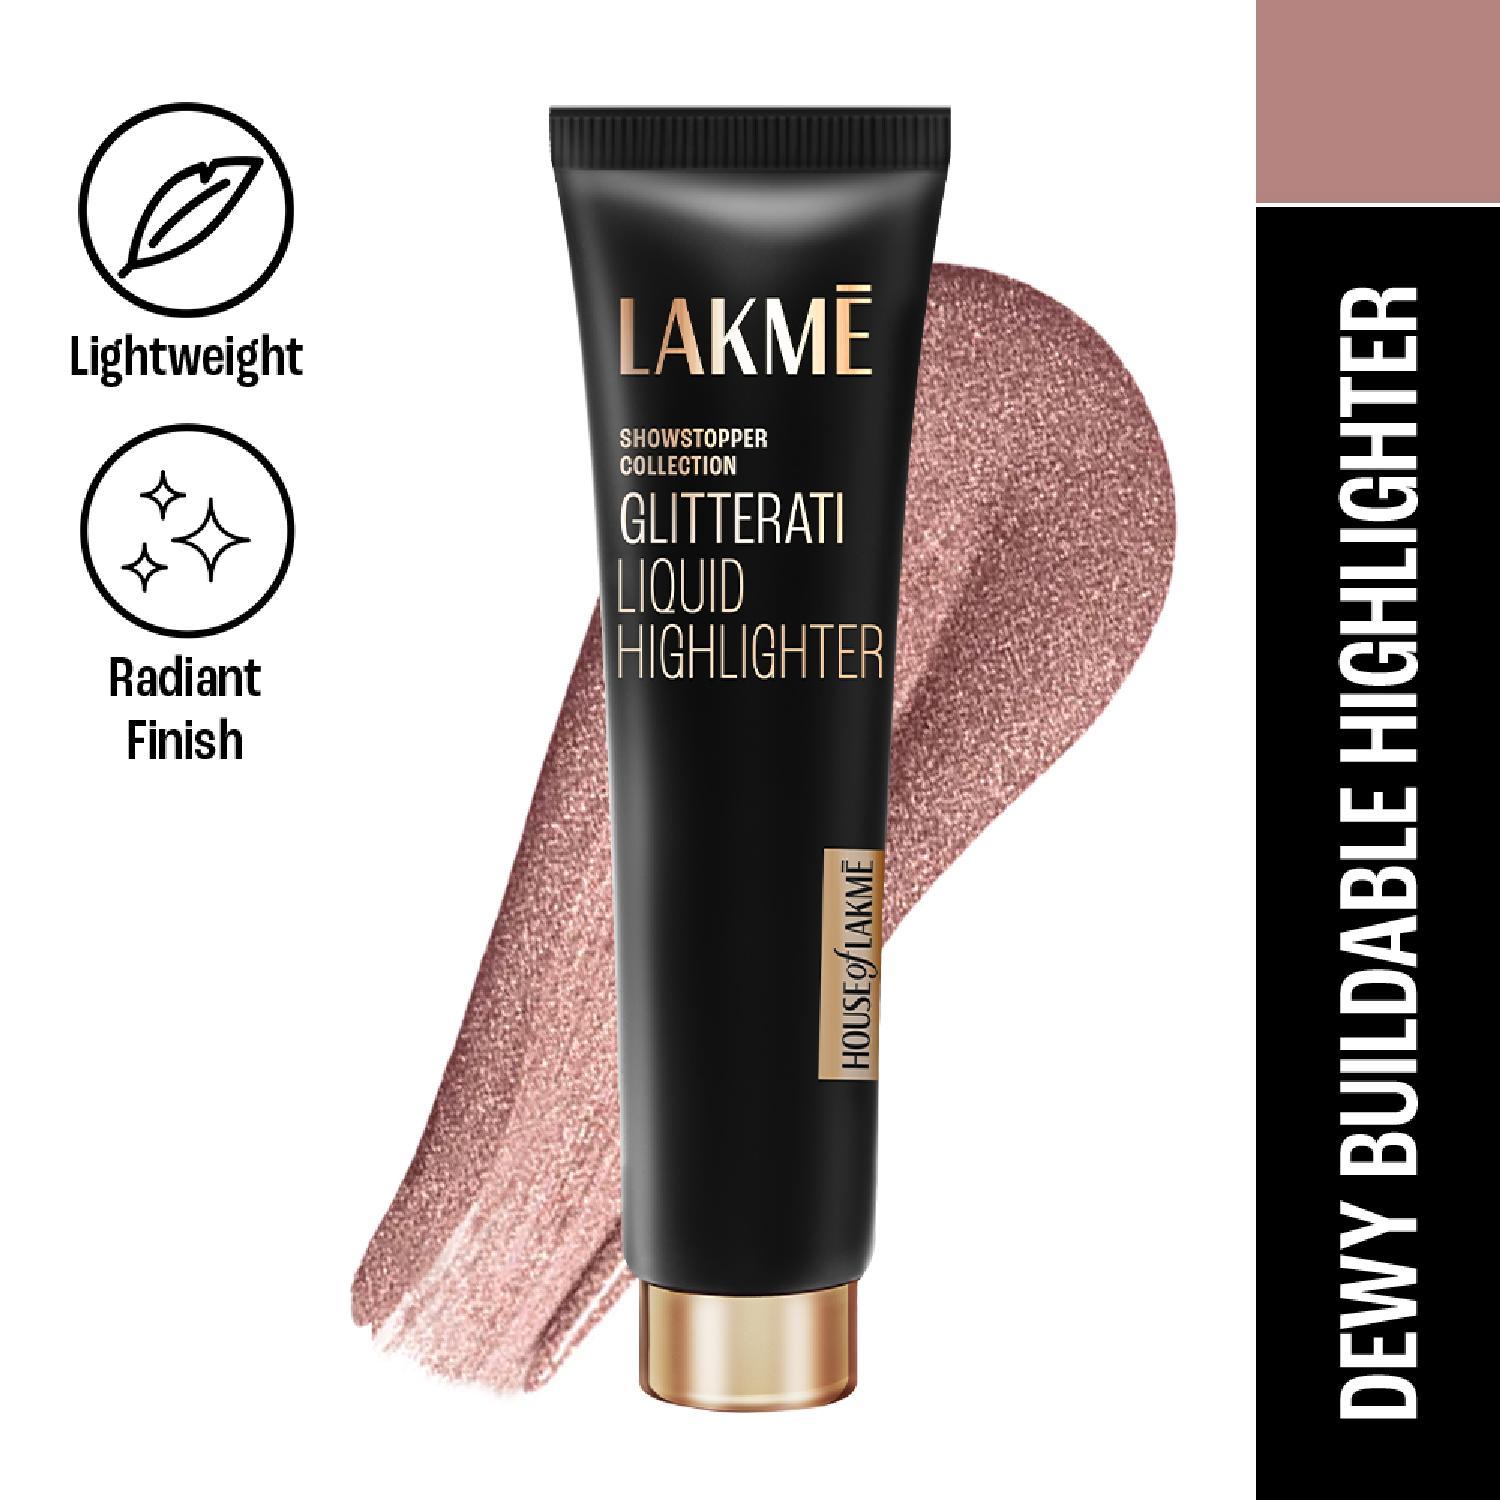 Lakme Glitterati Liquid Highlighter For Dewy Makeup Look - Rose Gold (25 g)